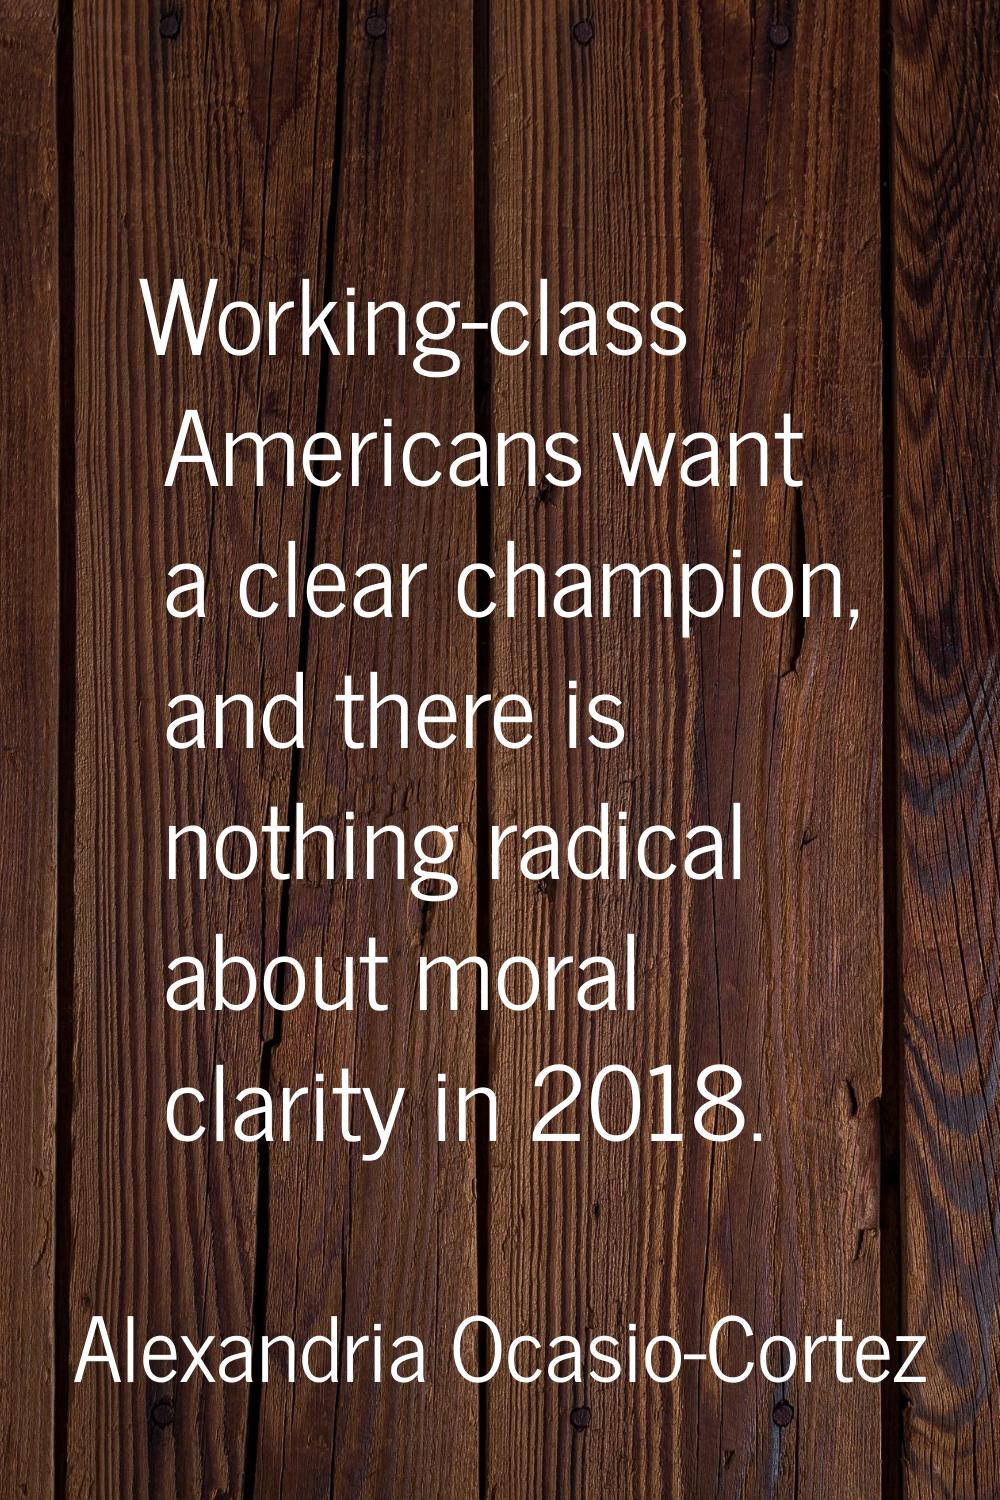 Working-class Americans want a clear champion, and there is nothing radical about moral clarity in 